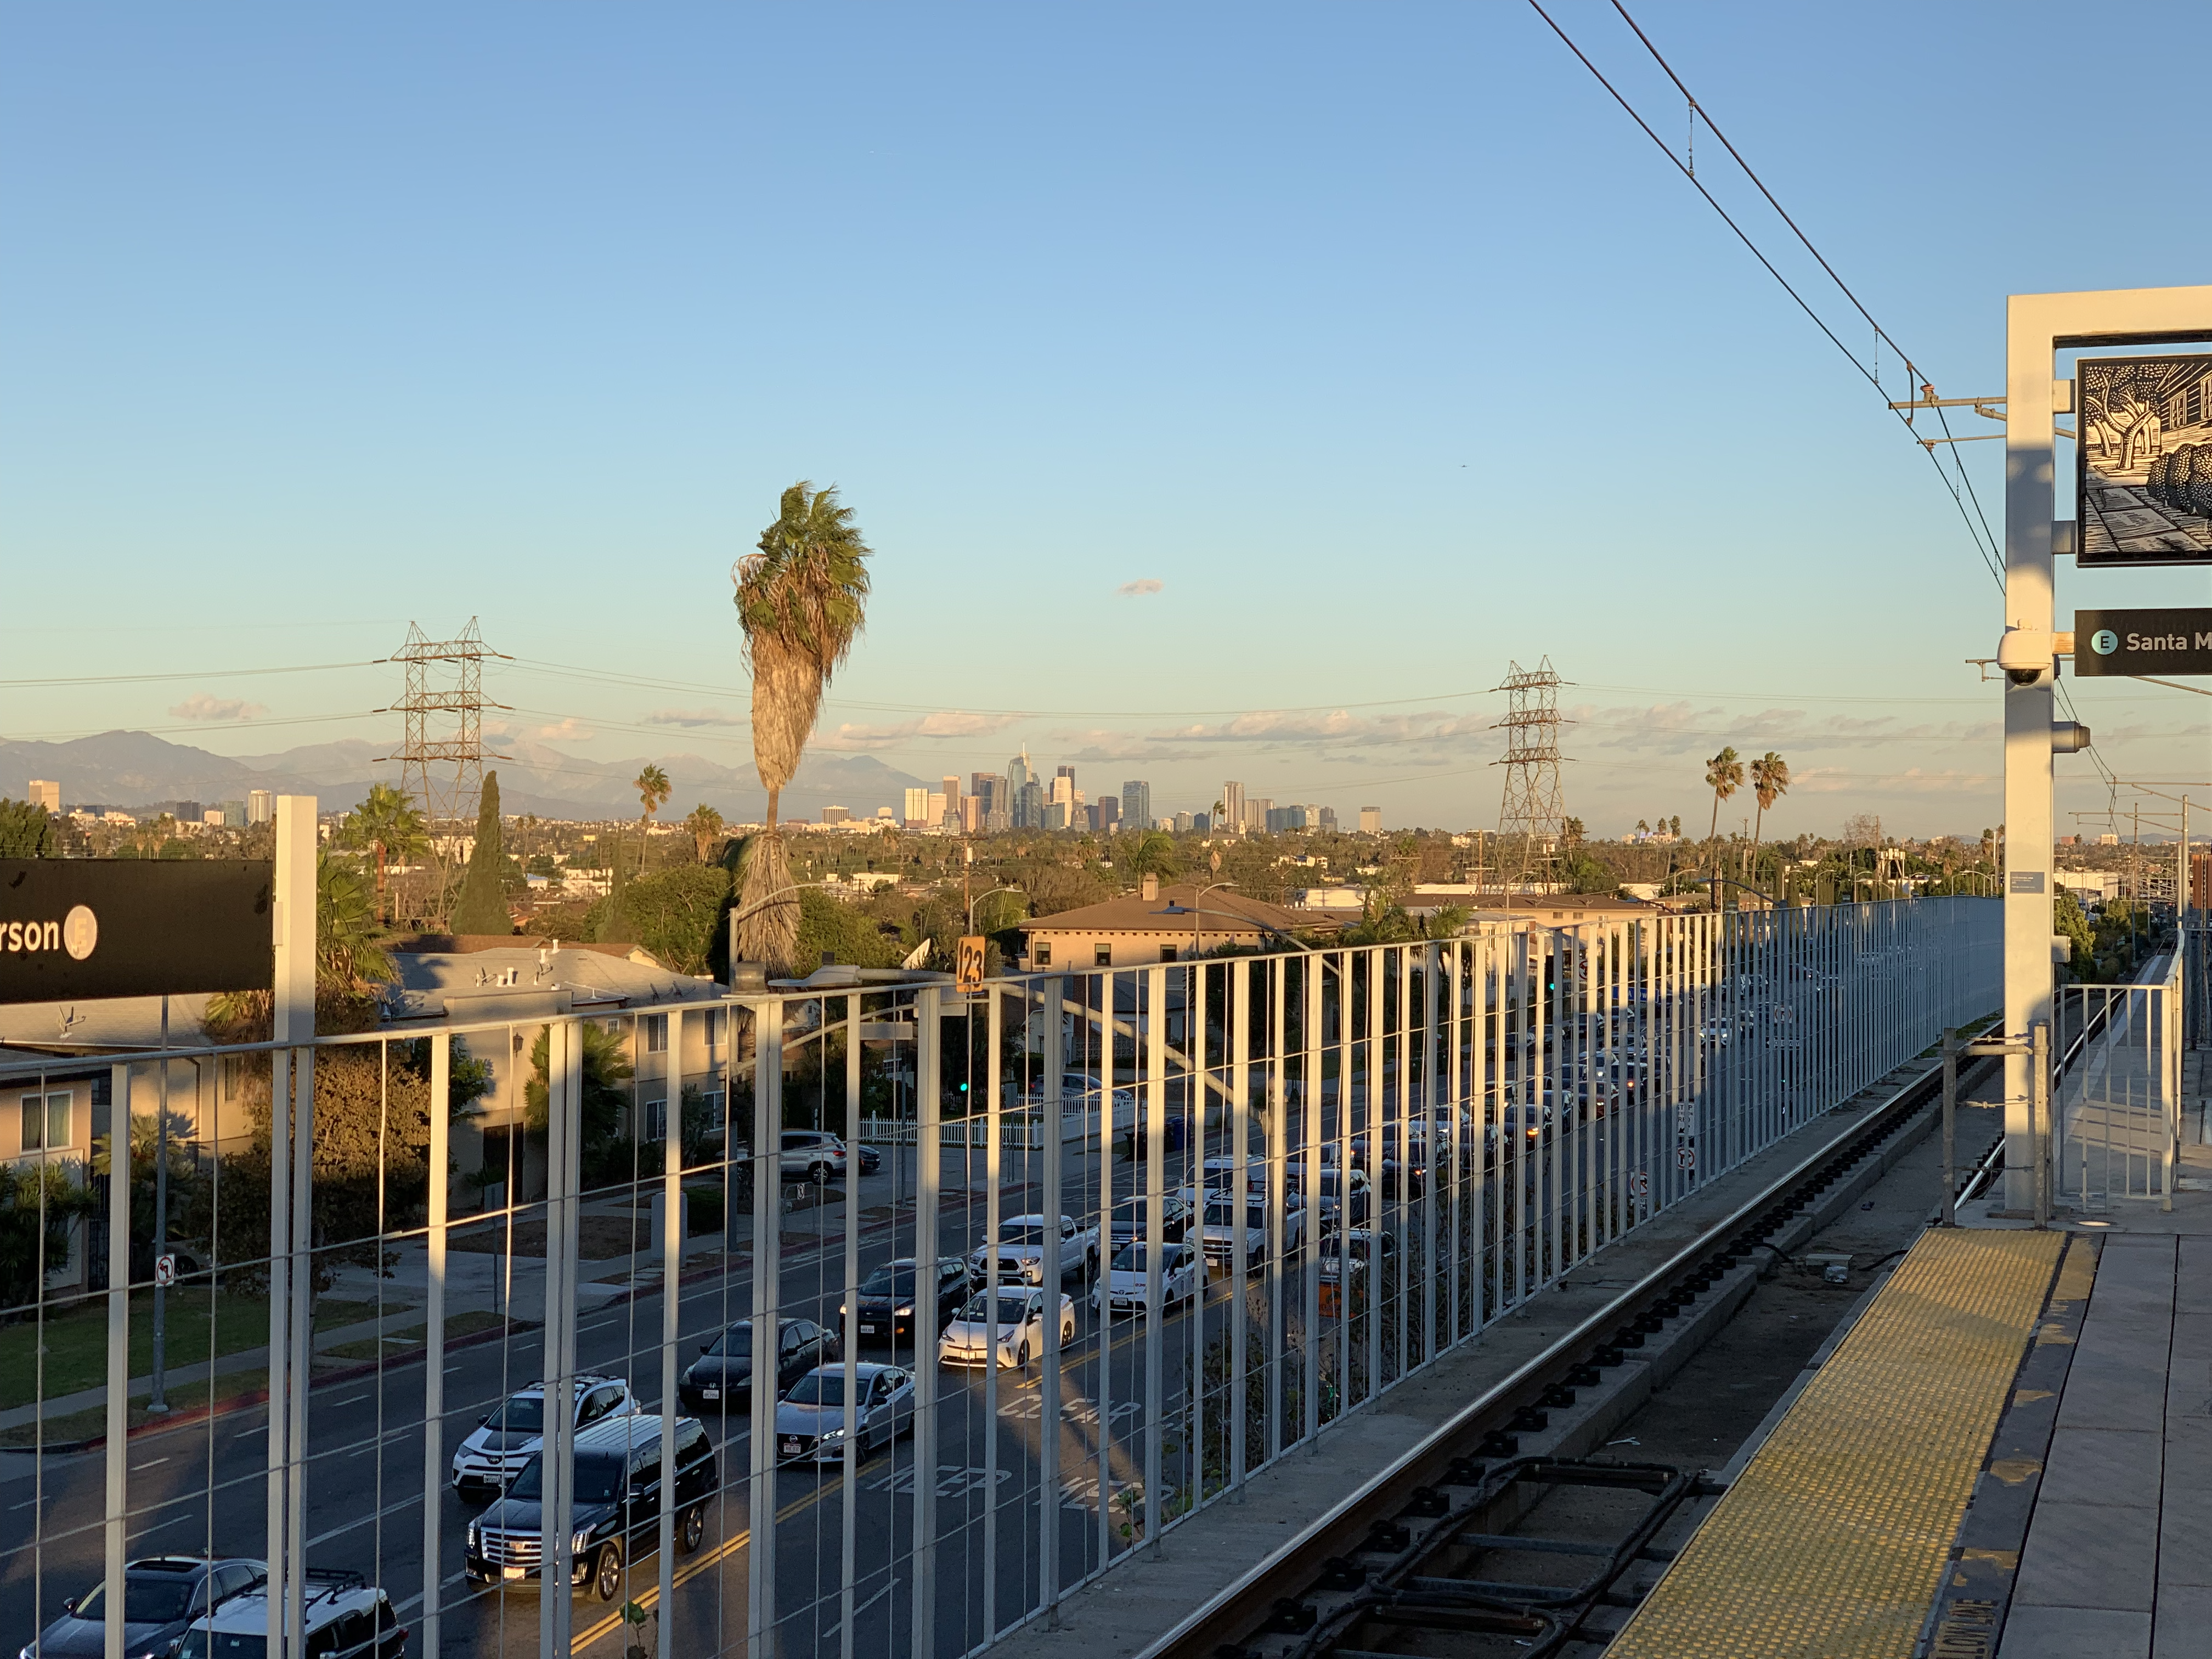 Downtown Los Angeles, viewed from a metro station